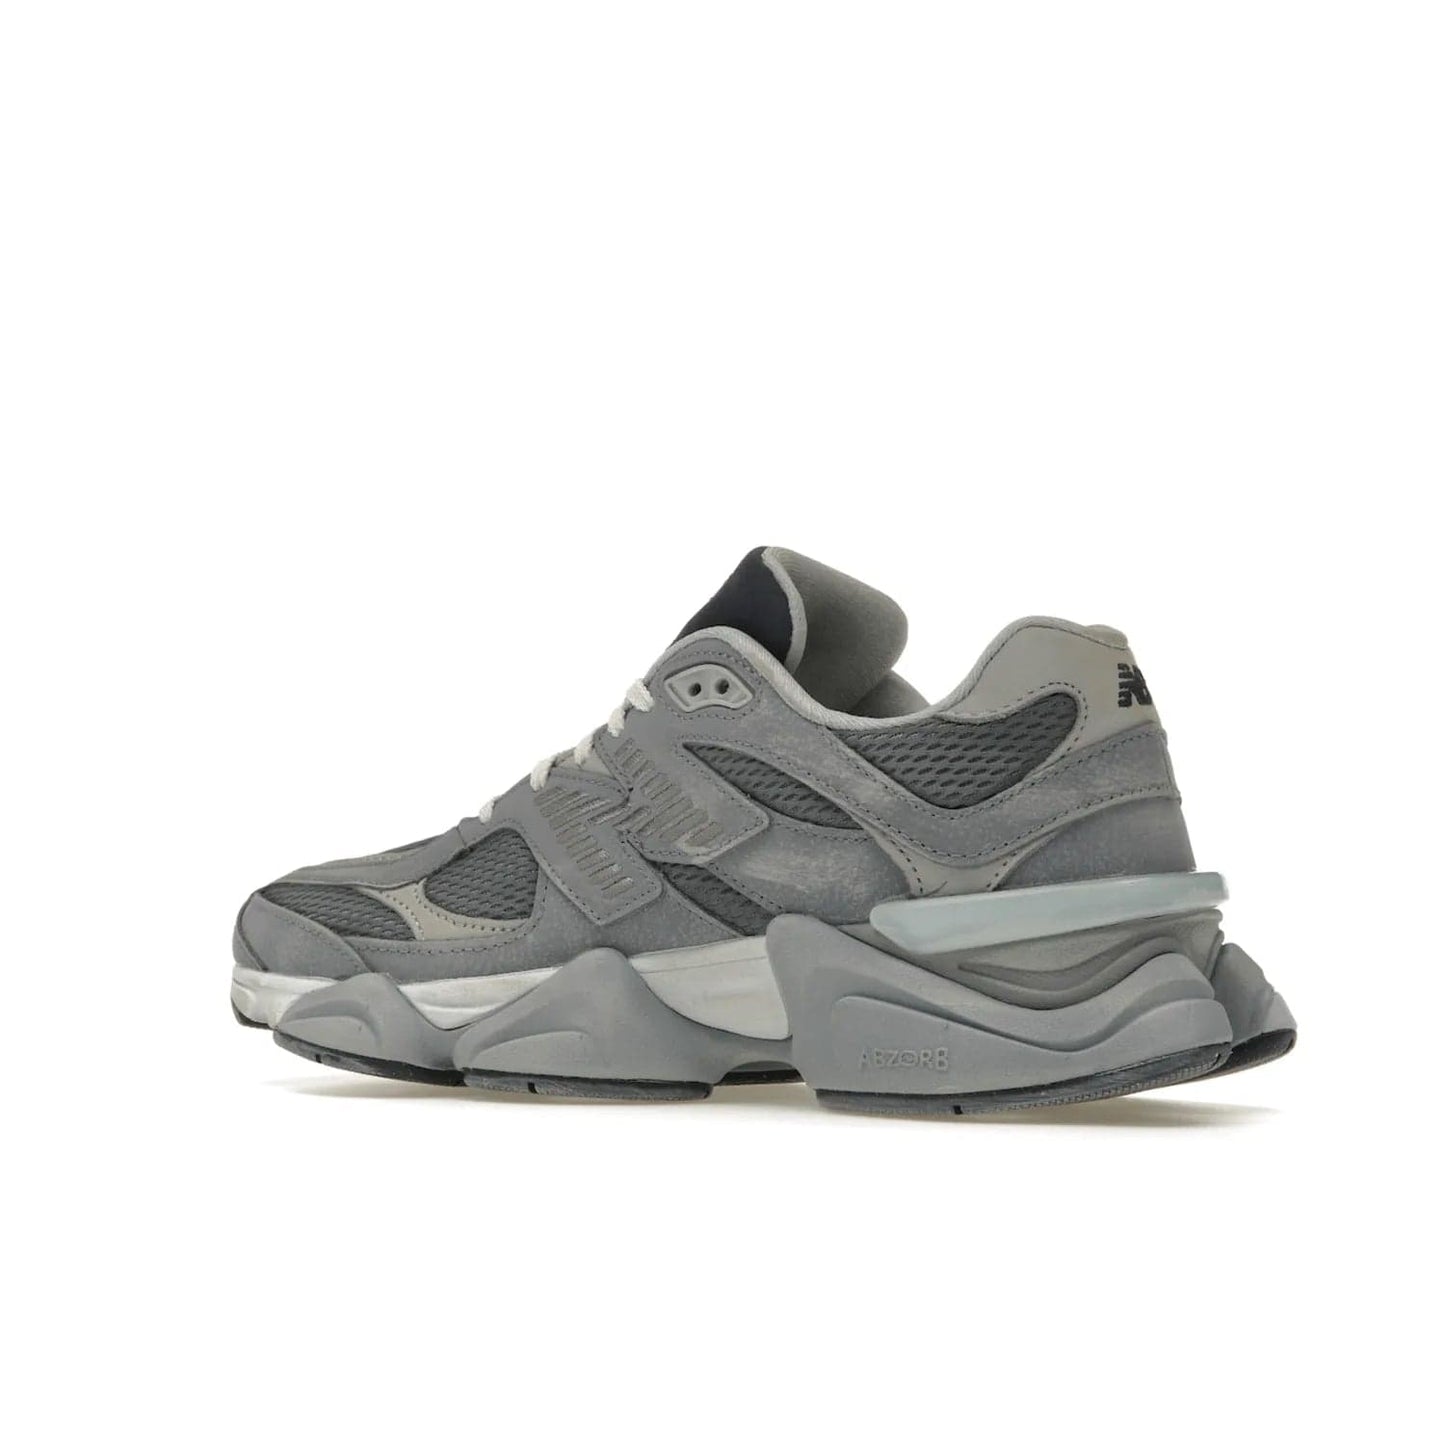 New Balance 9060 Grey Day (2023) - Image 22 - Only at www.BallersClubKickz.com - #
Sporty-meets-stylish in the New Balance 9060 Grey Day sneaker. Designed with Arctic Grey, Steel, and Silver Metallic, it offers an edgy but wearable look along with classic NB comfort and quality.